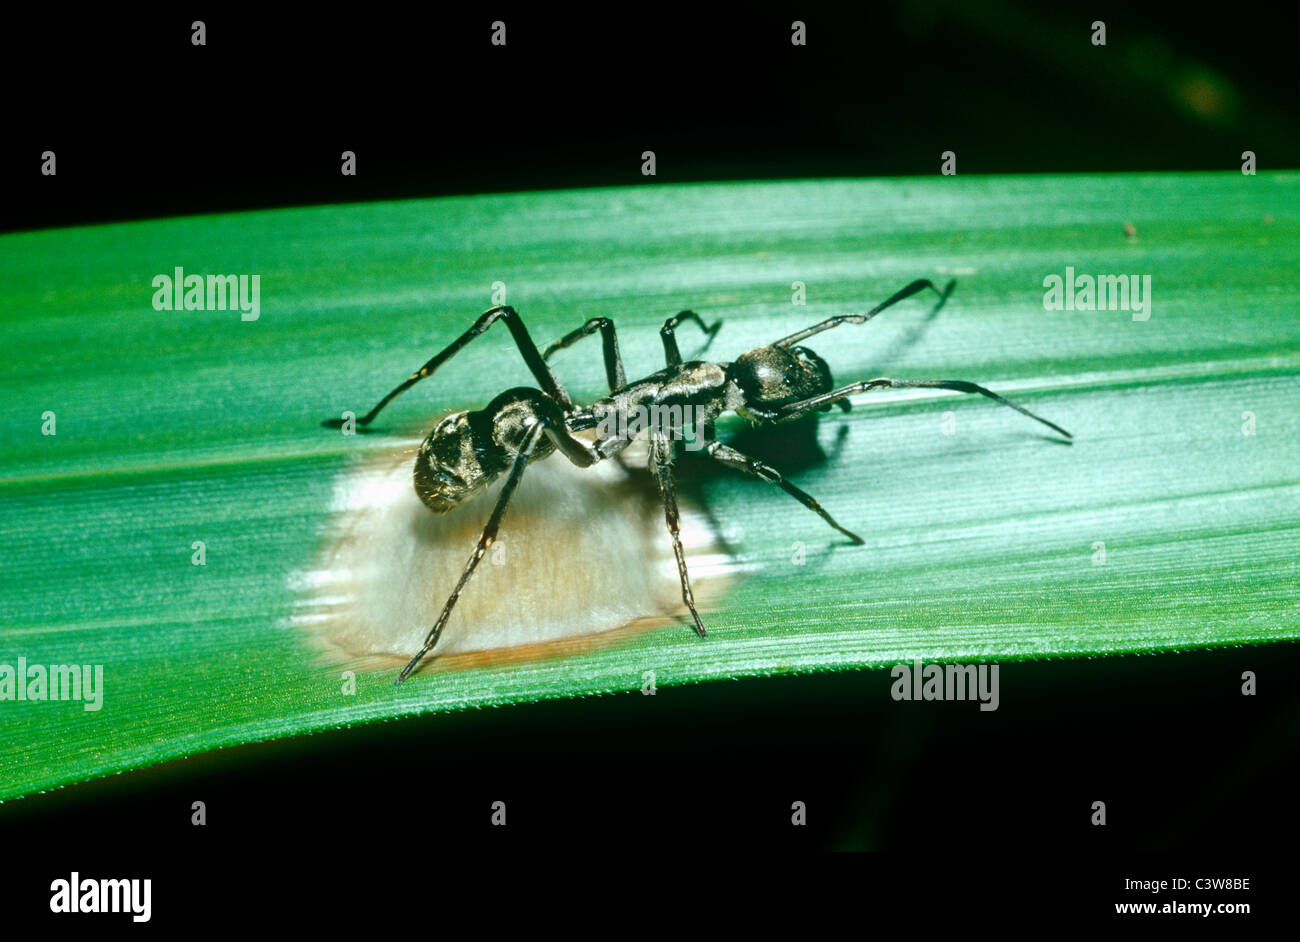 Ant-mimic spider (Myrmecium sp.: Clubionidae) female spinning her egg-sac on a leaf in rainforest, Costa Rica Stock Photo